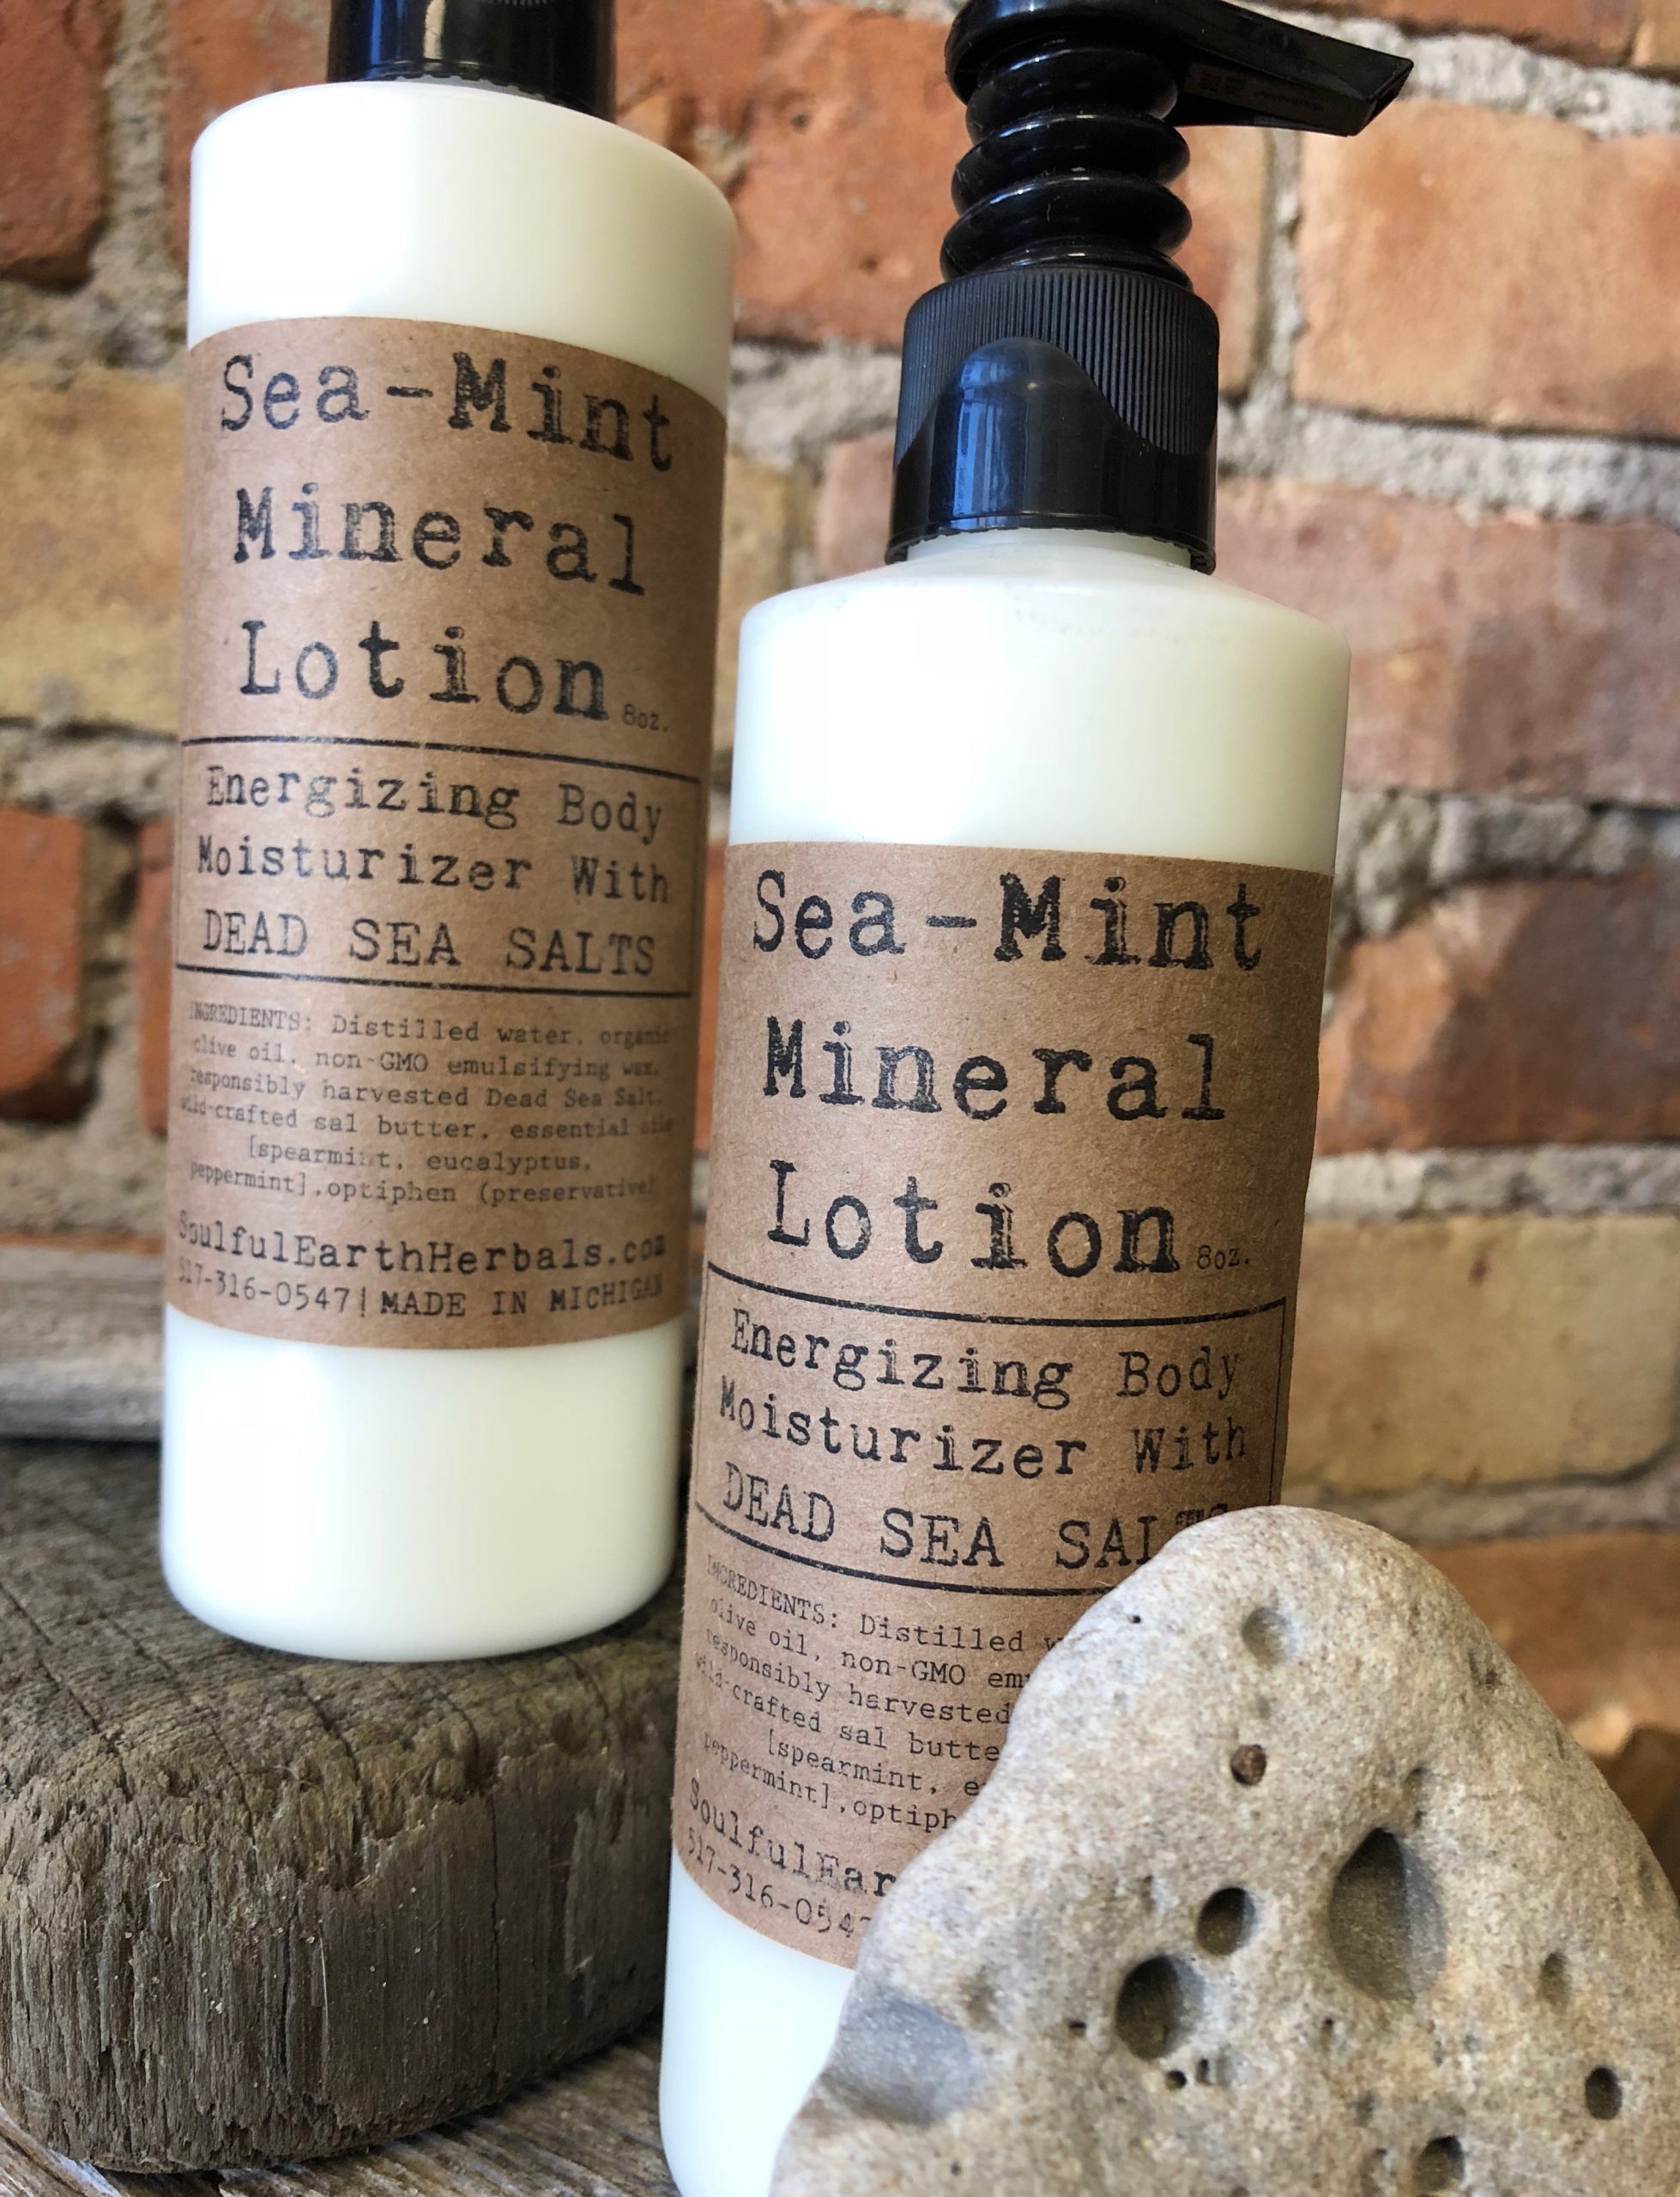 Sea-Mint Mineral Lotion – Soulful Earth Herbals